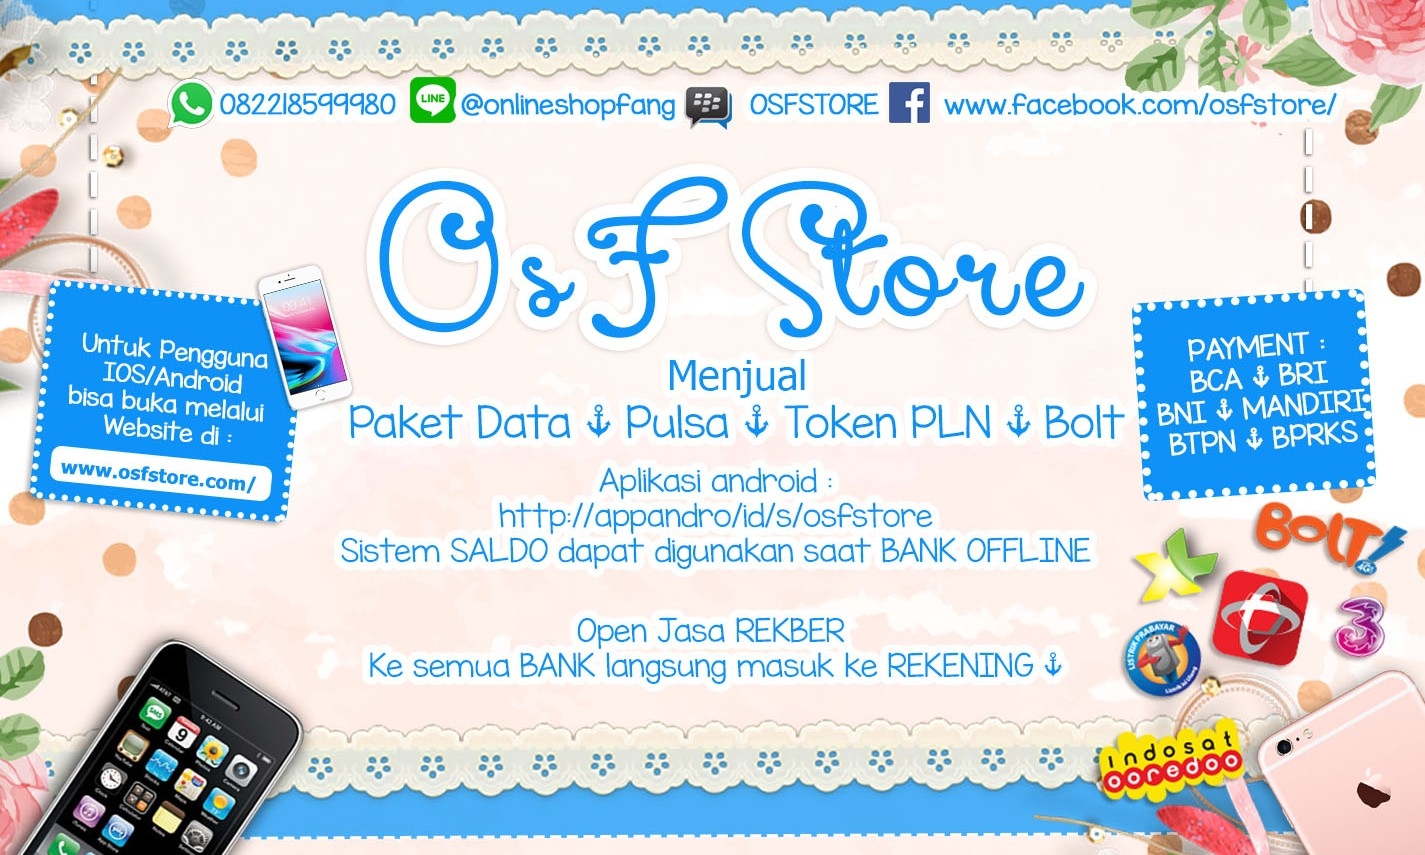 OSF STORE 0